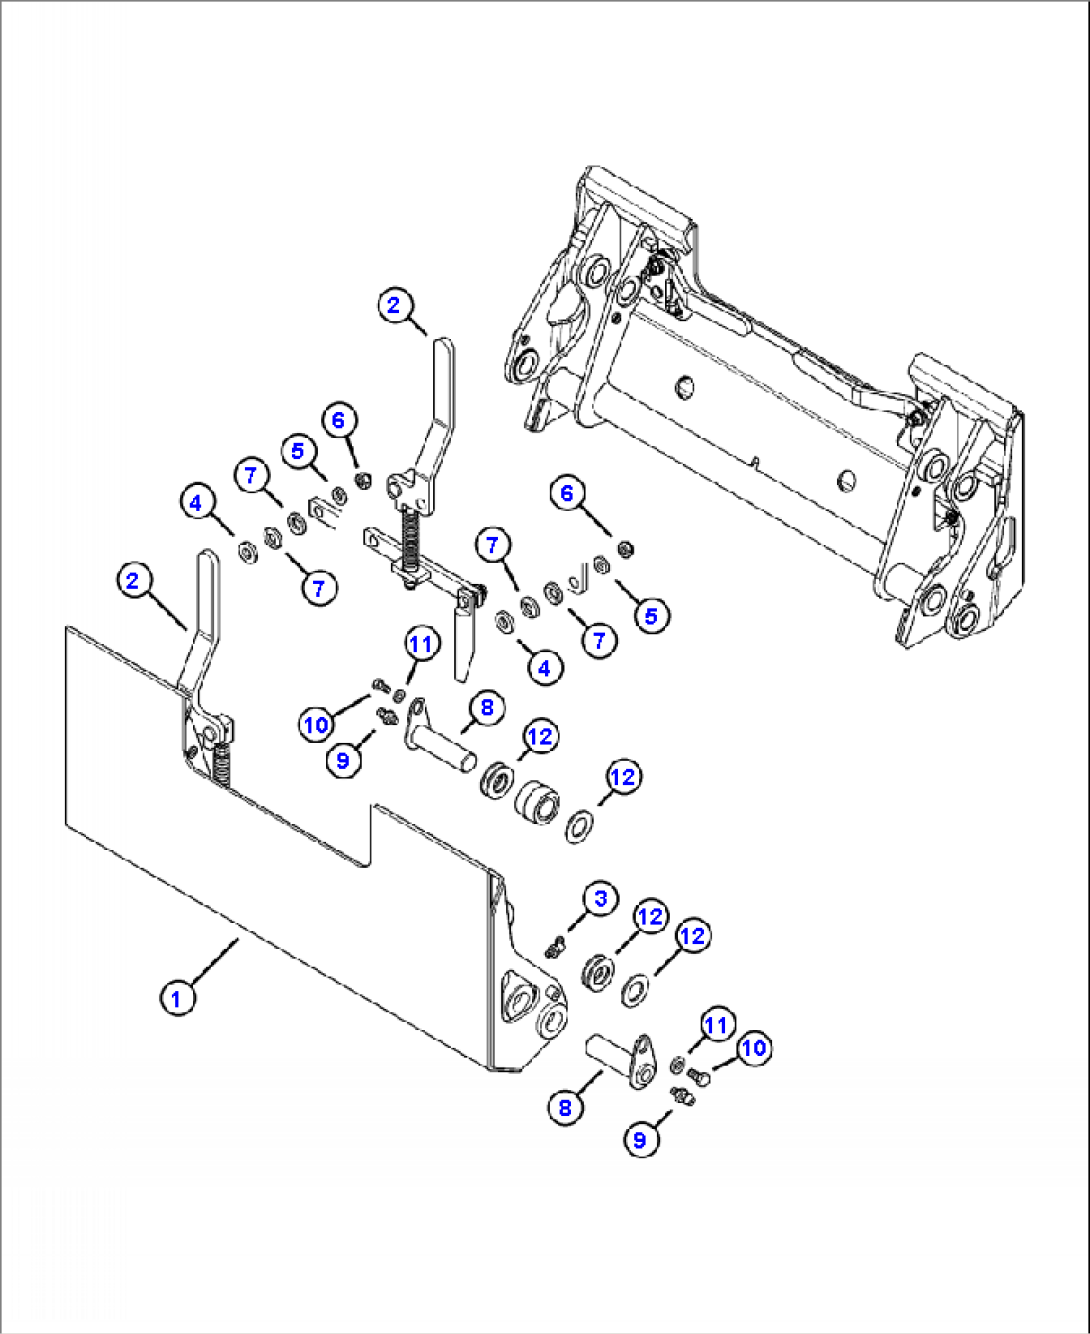 T6005-01A00 FRONT COUPLER PLATE AND LEVER